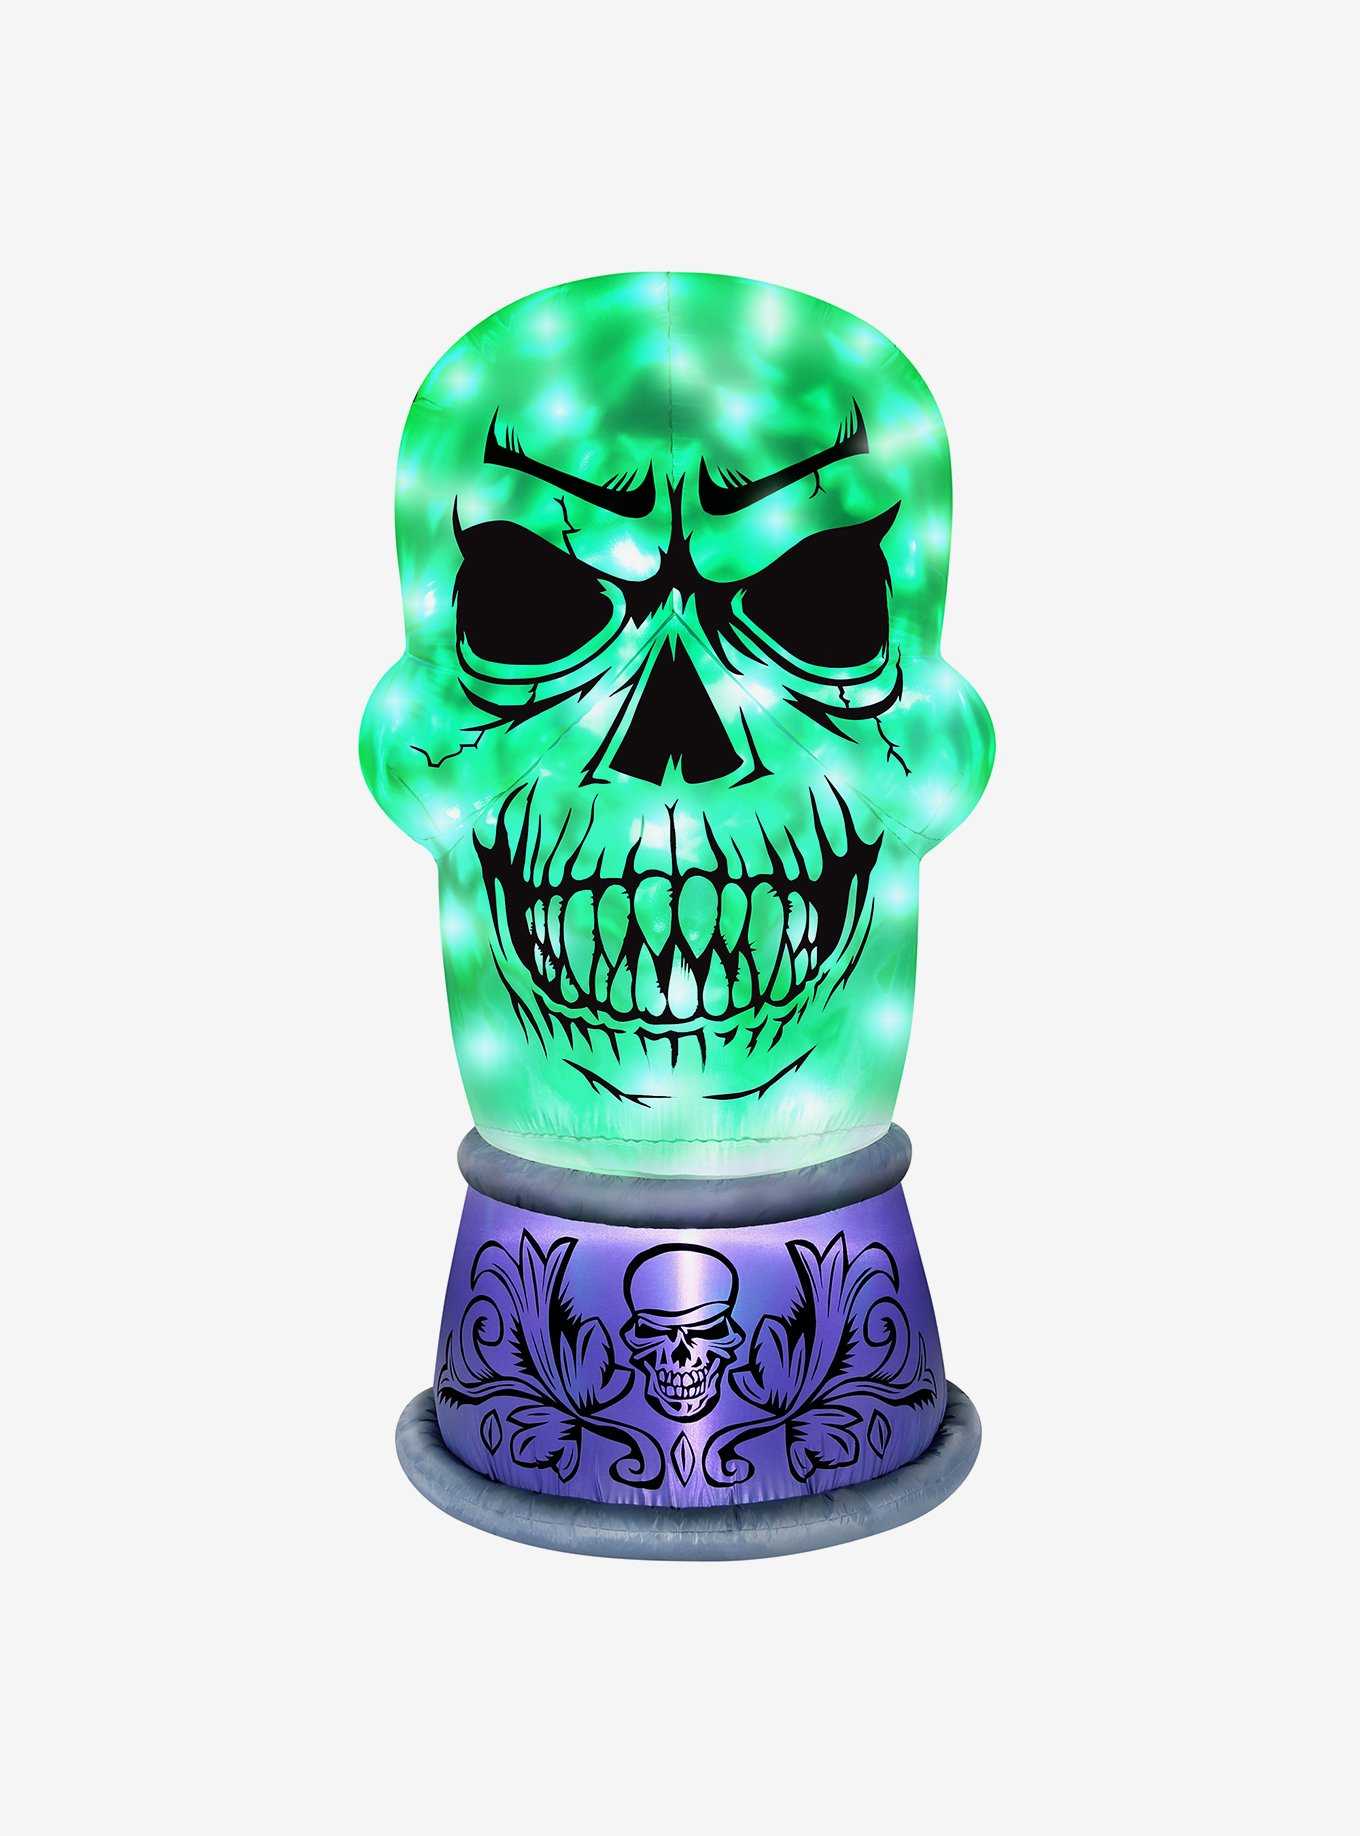 Skull with Swirling Lights Airblown, , hi-res